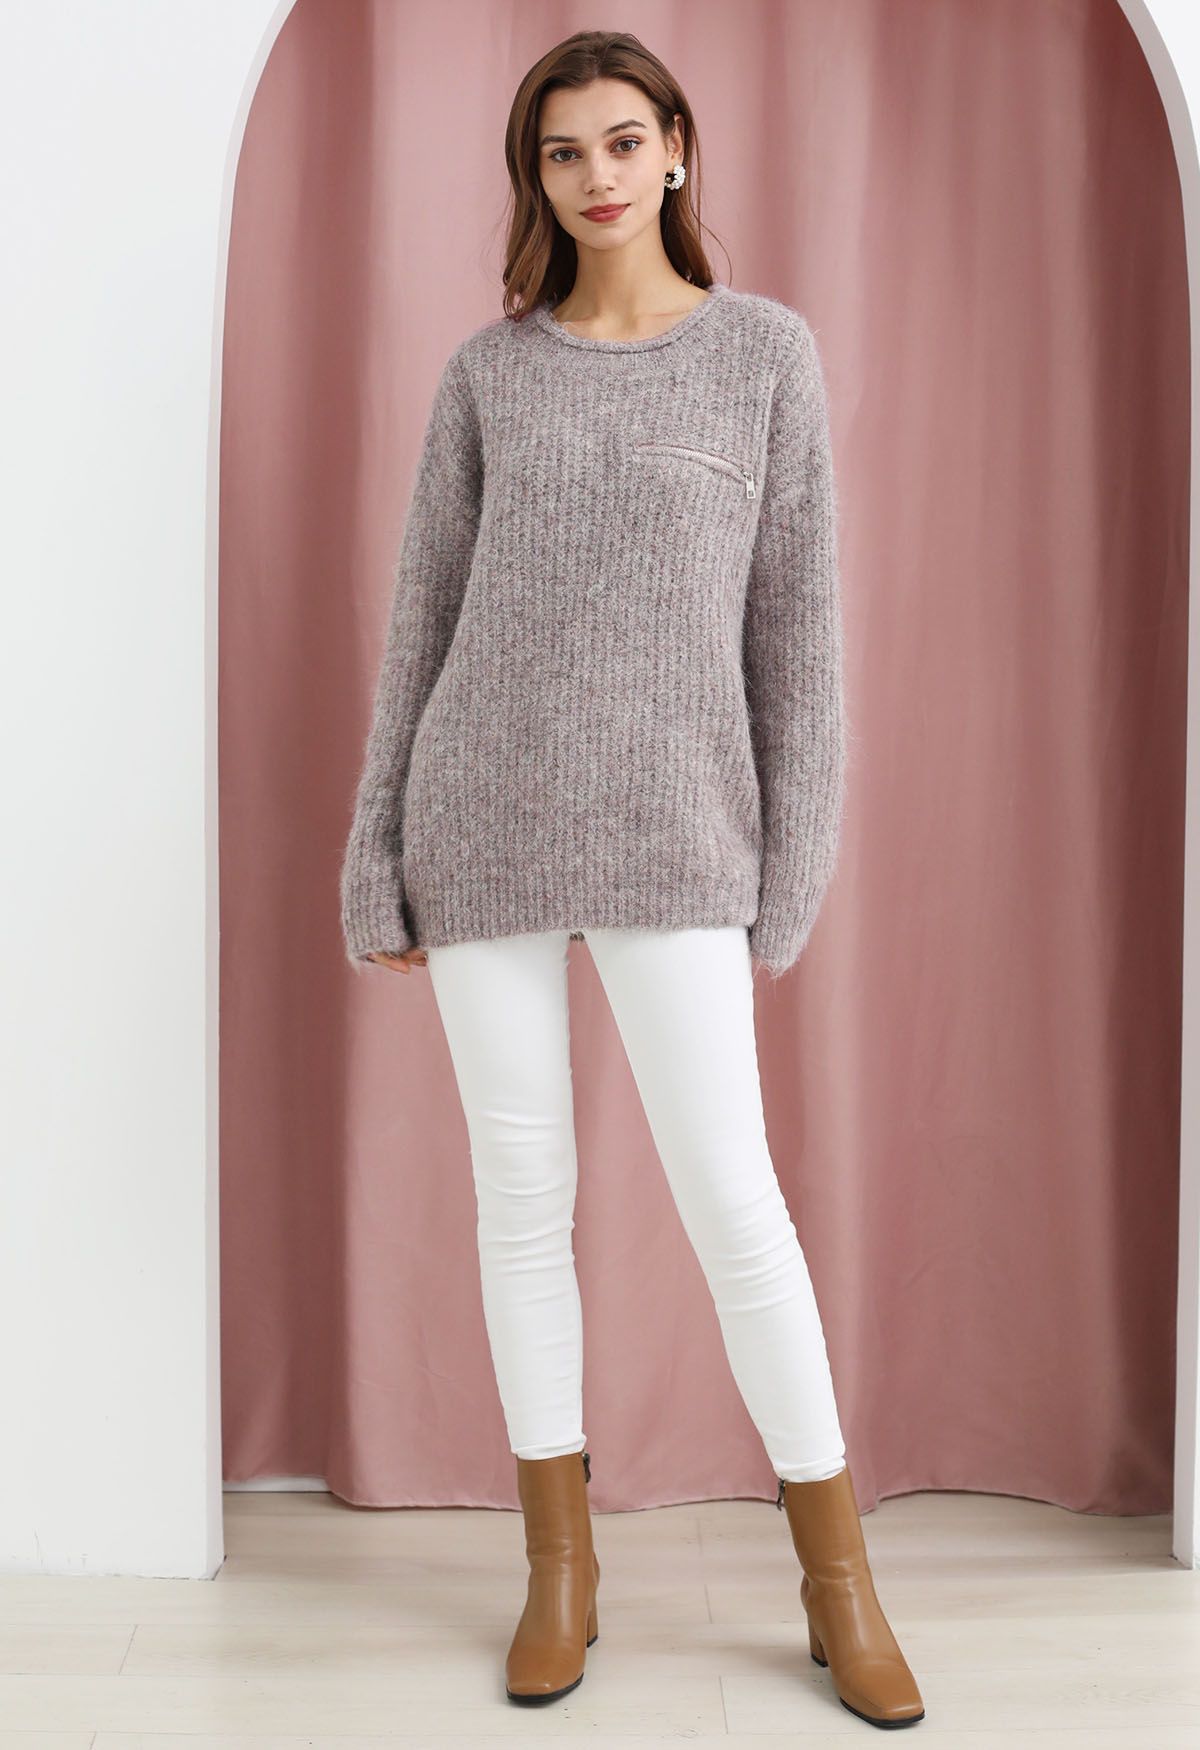 Zipper Decorated Fuzzy Knit Sweater in Oatmeal